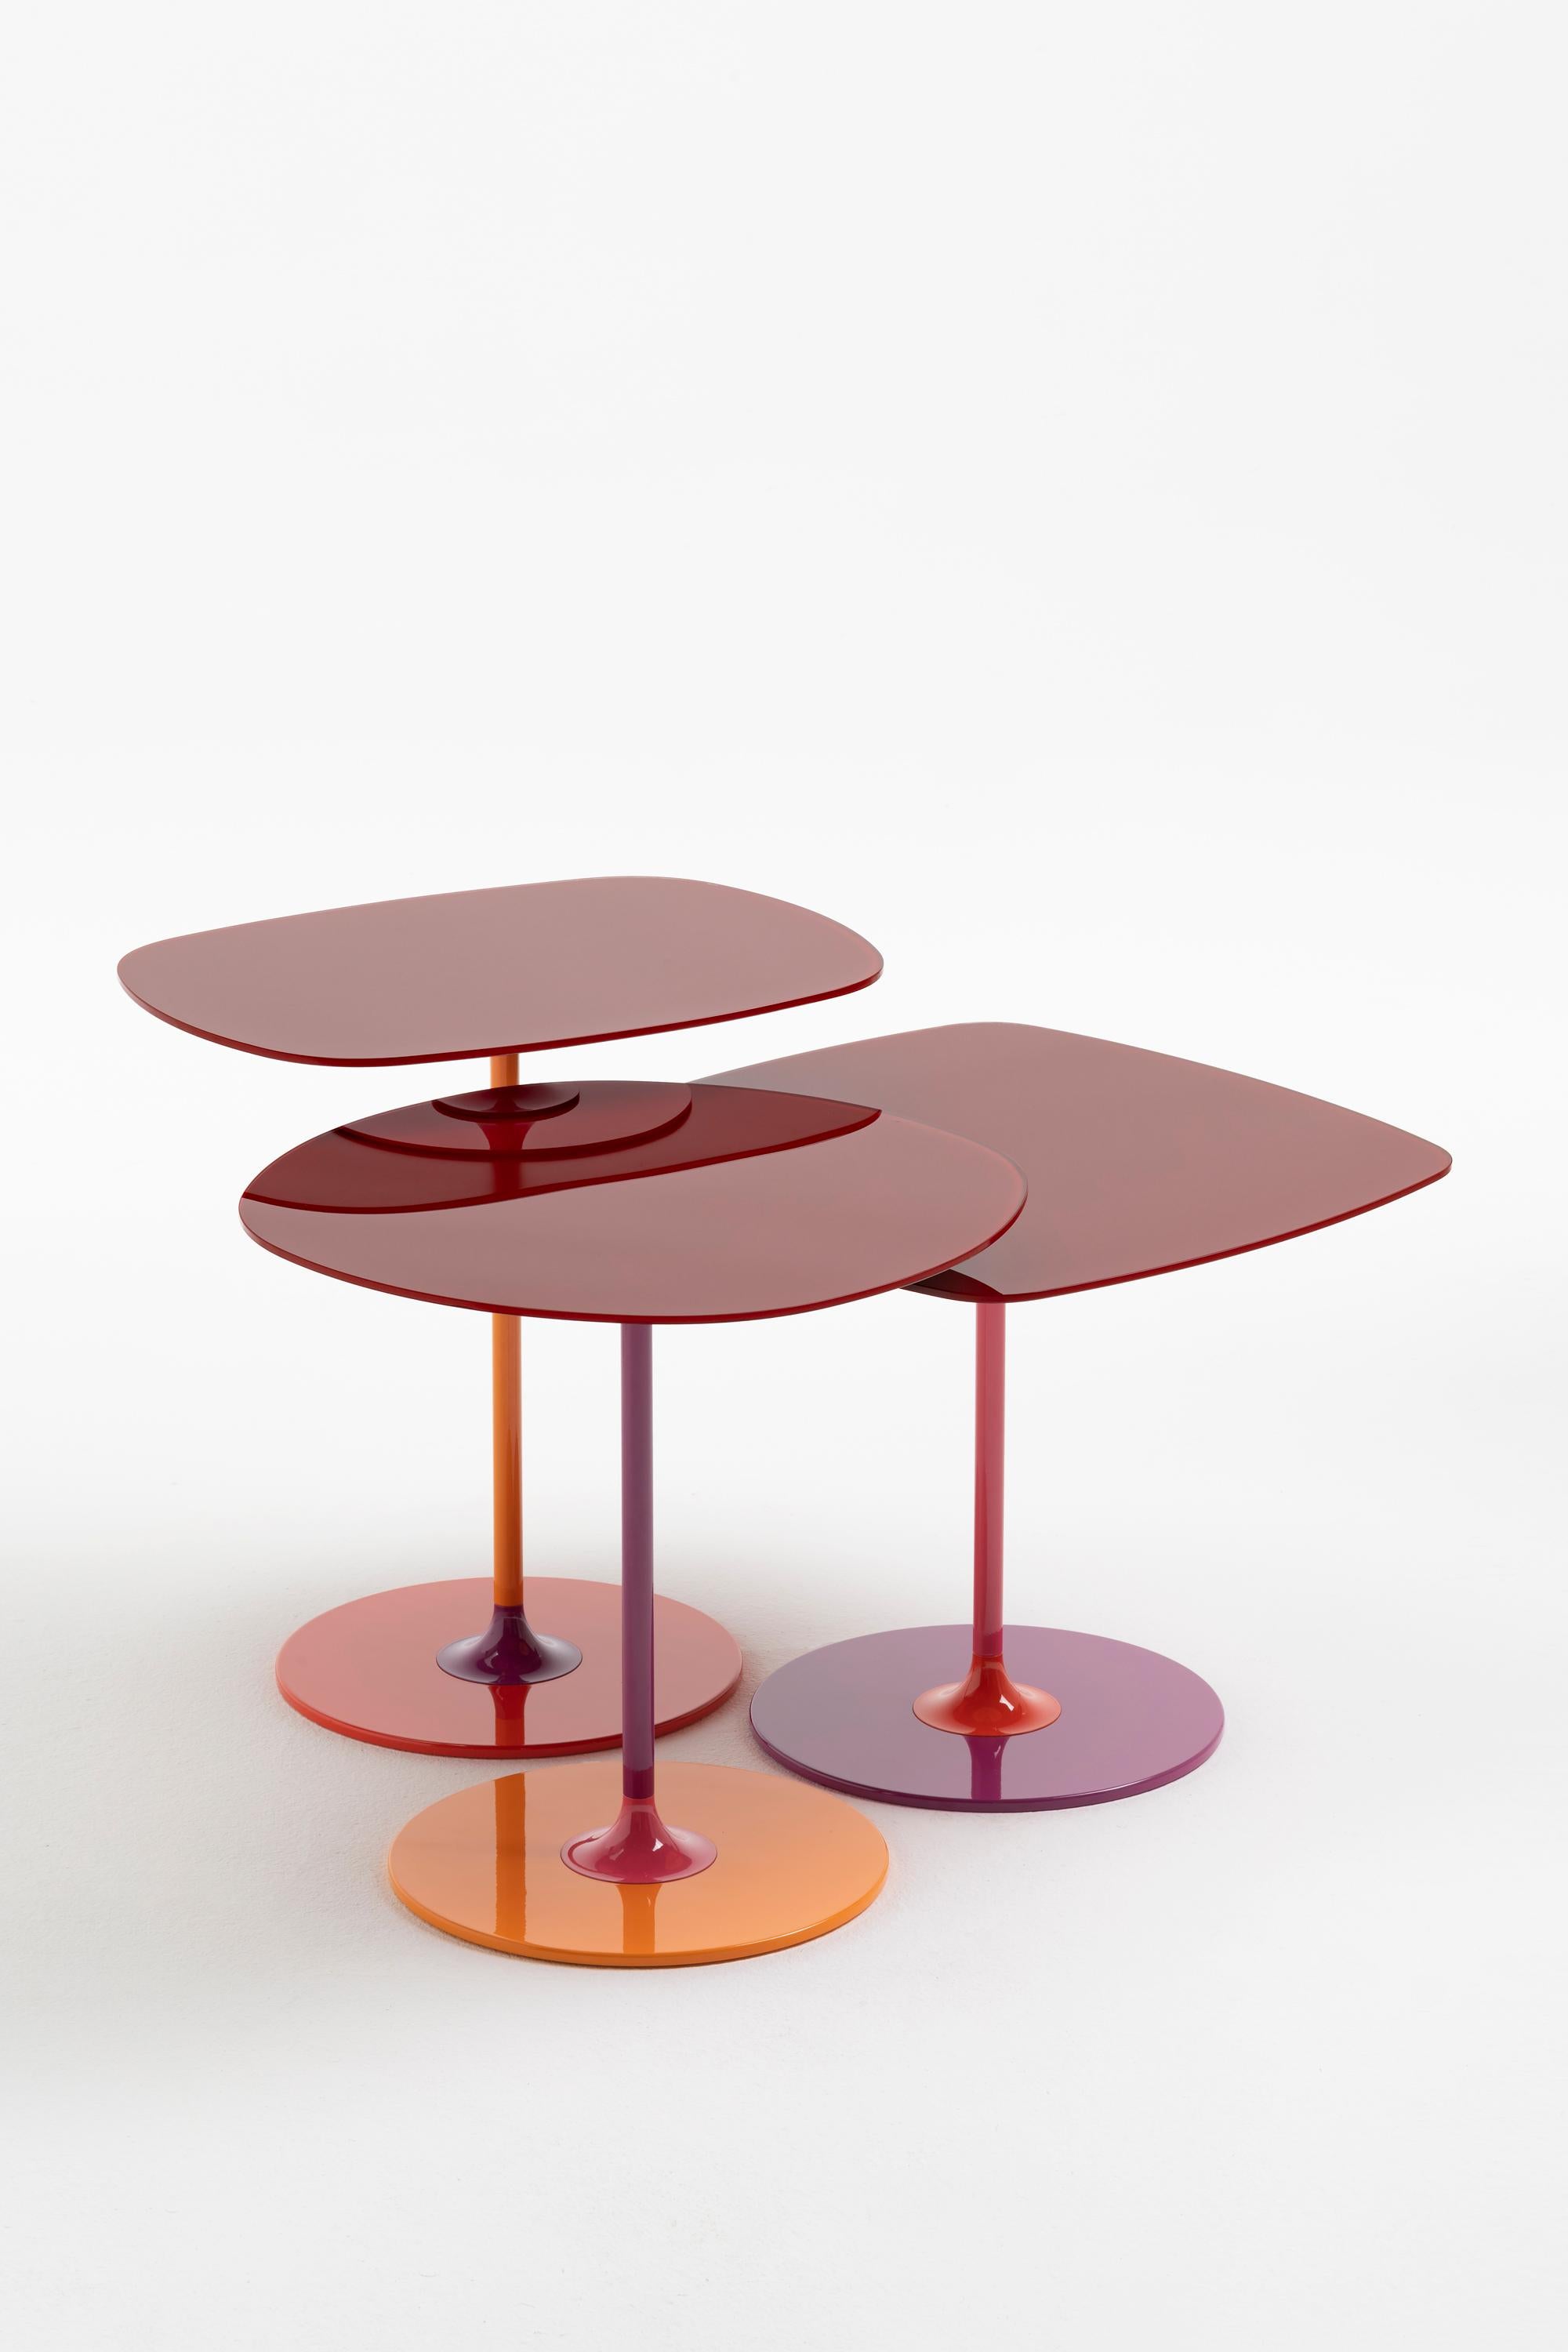 Modern Kartell Thierry Table by Piero Lissoni in Burgundy For Sale